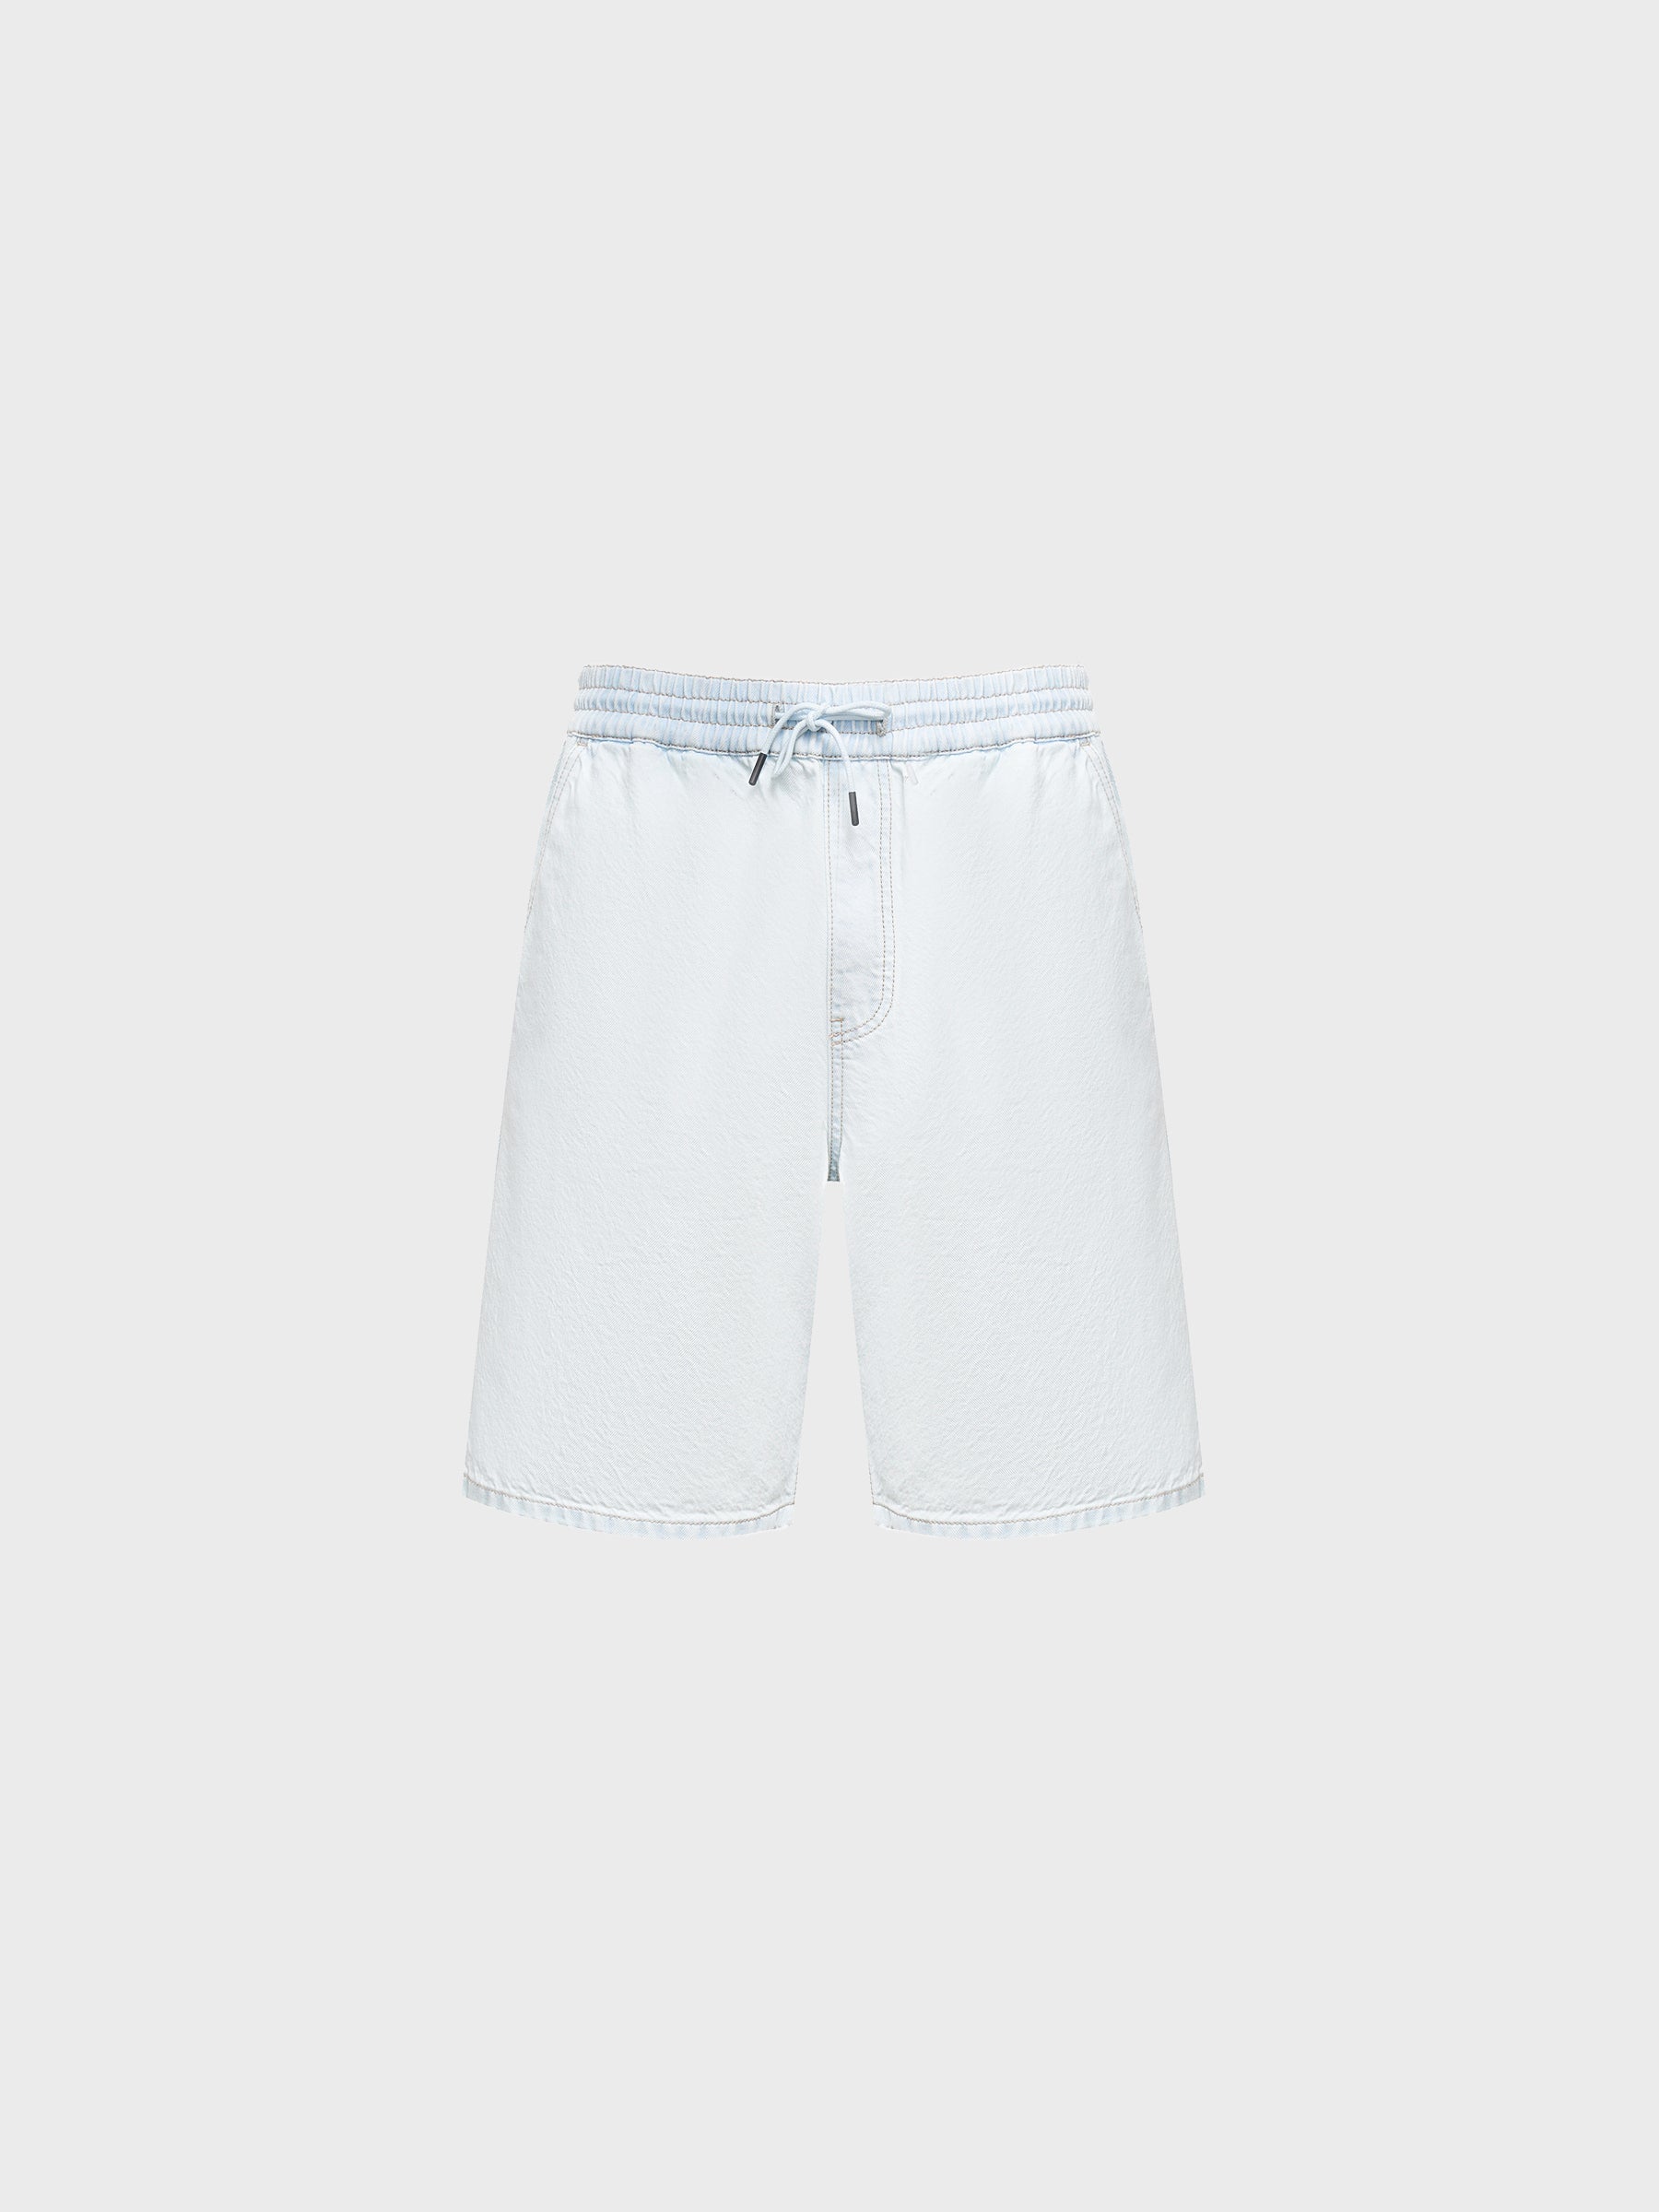 Relaxed fit denim shorts